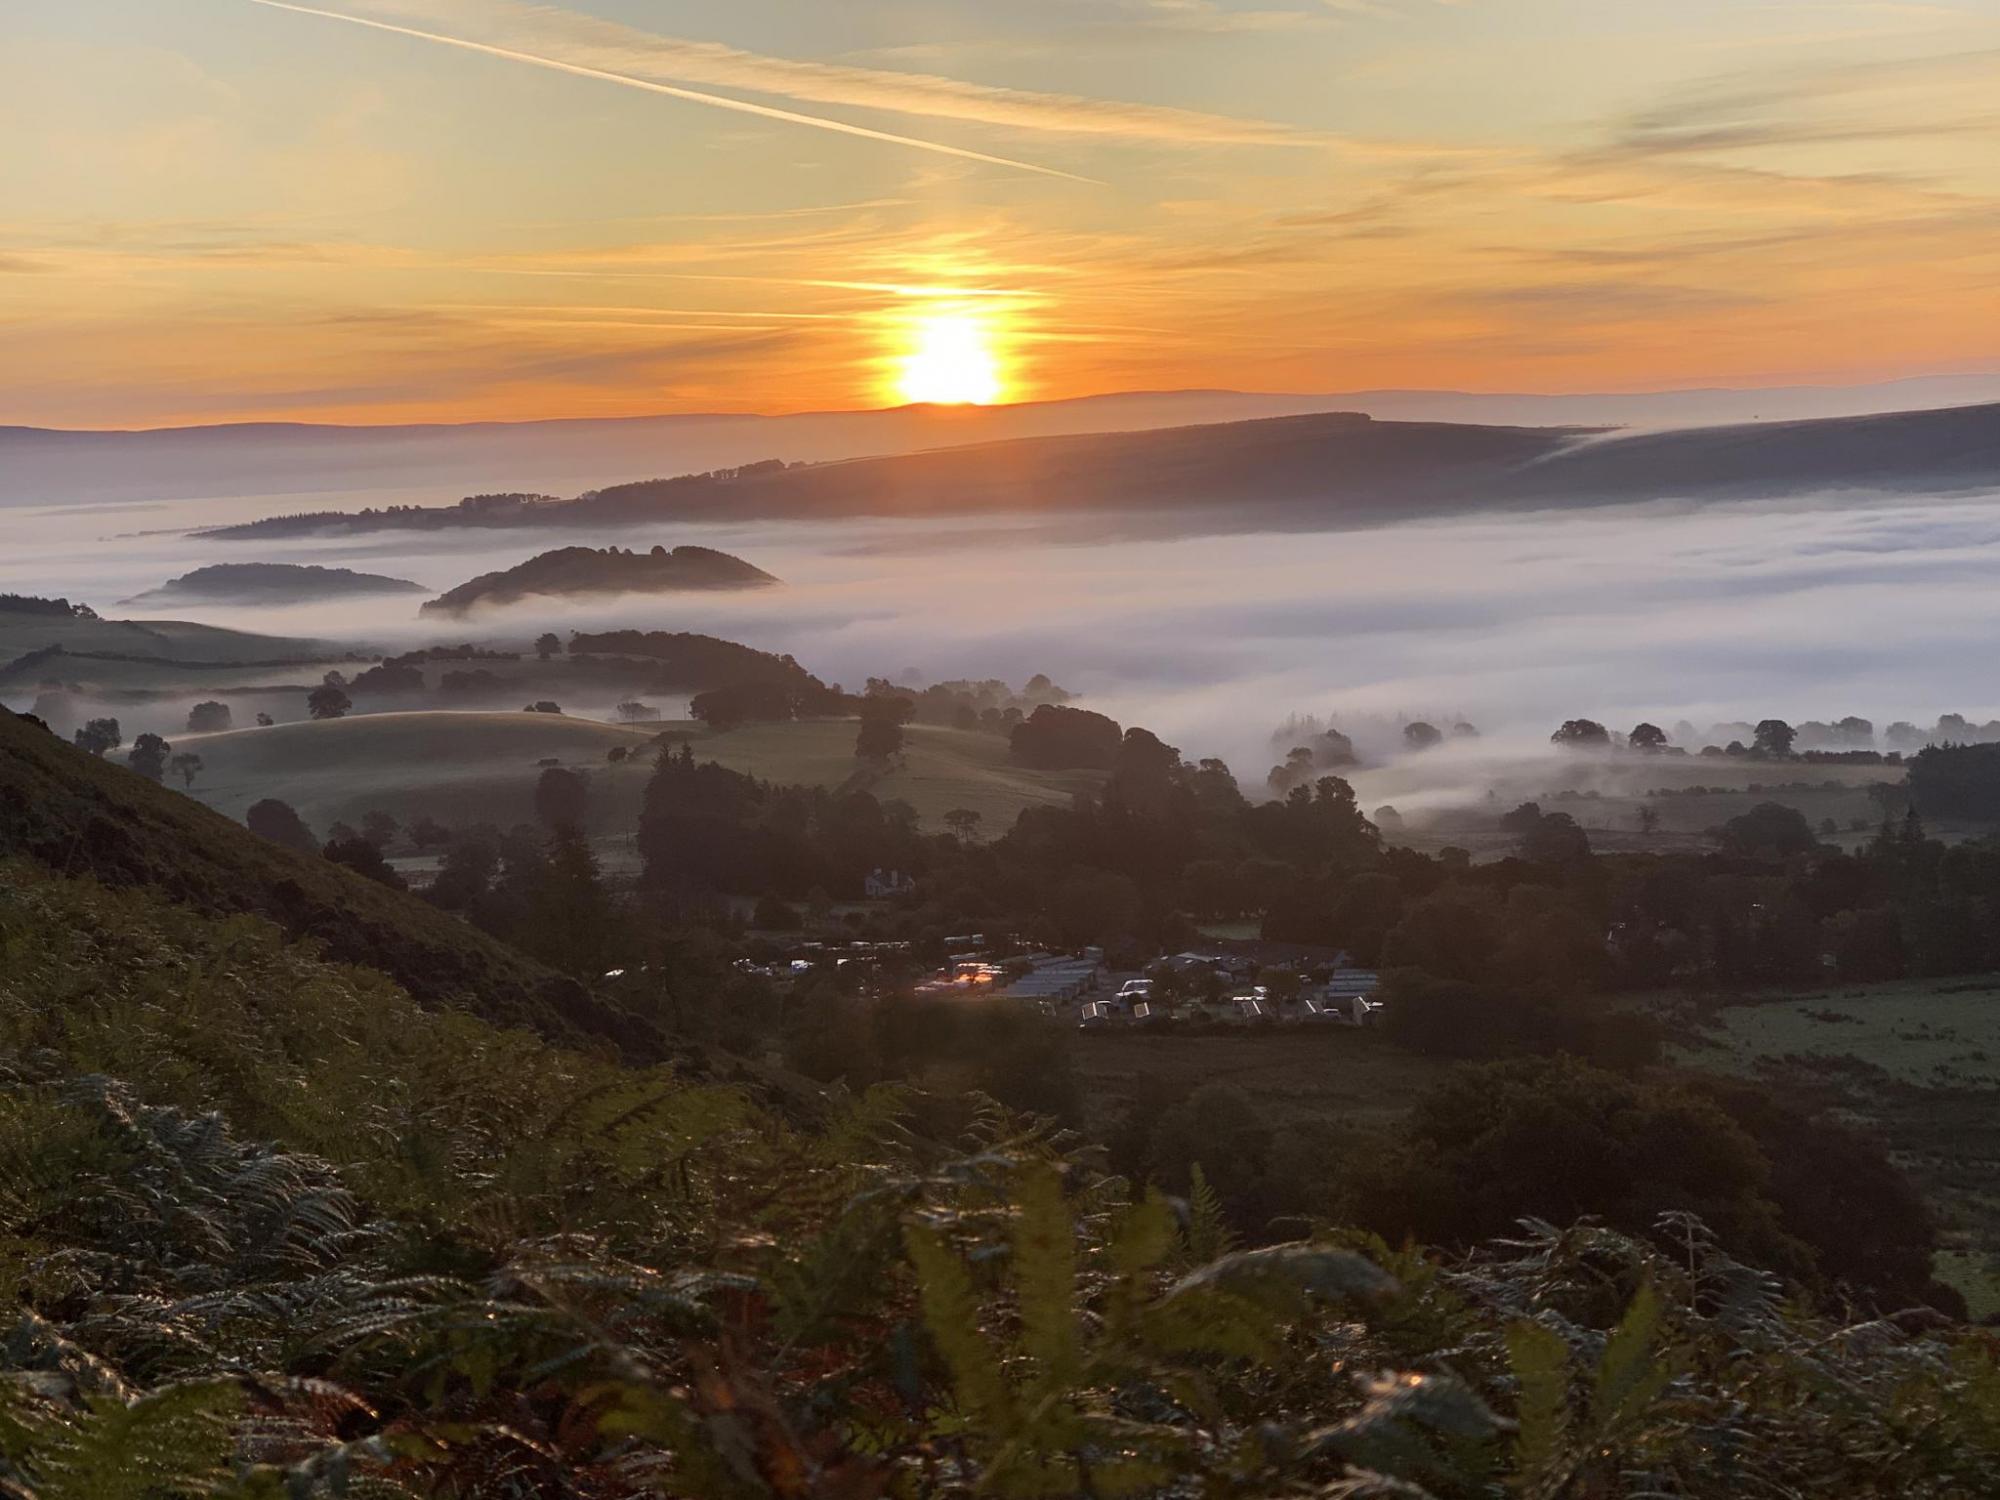 Sunrise over a misty landscape, with a glamping site in the mid distance valley